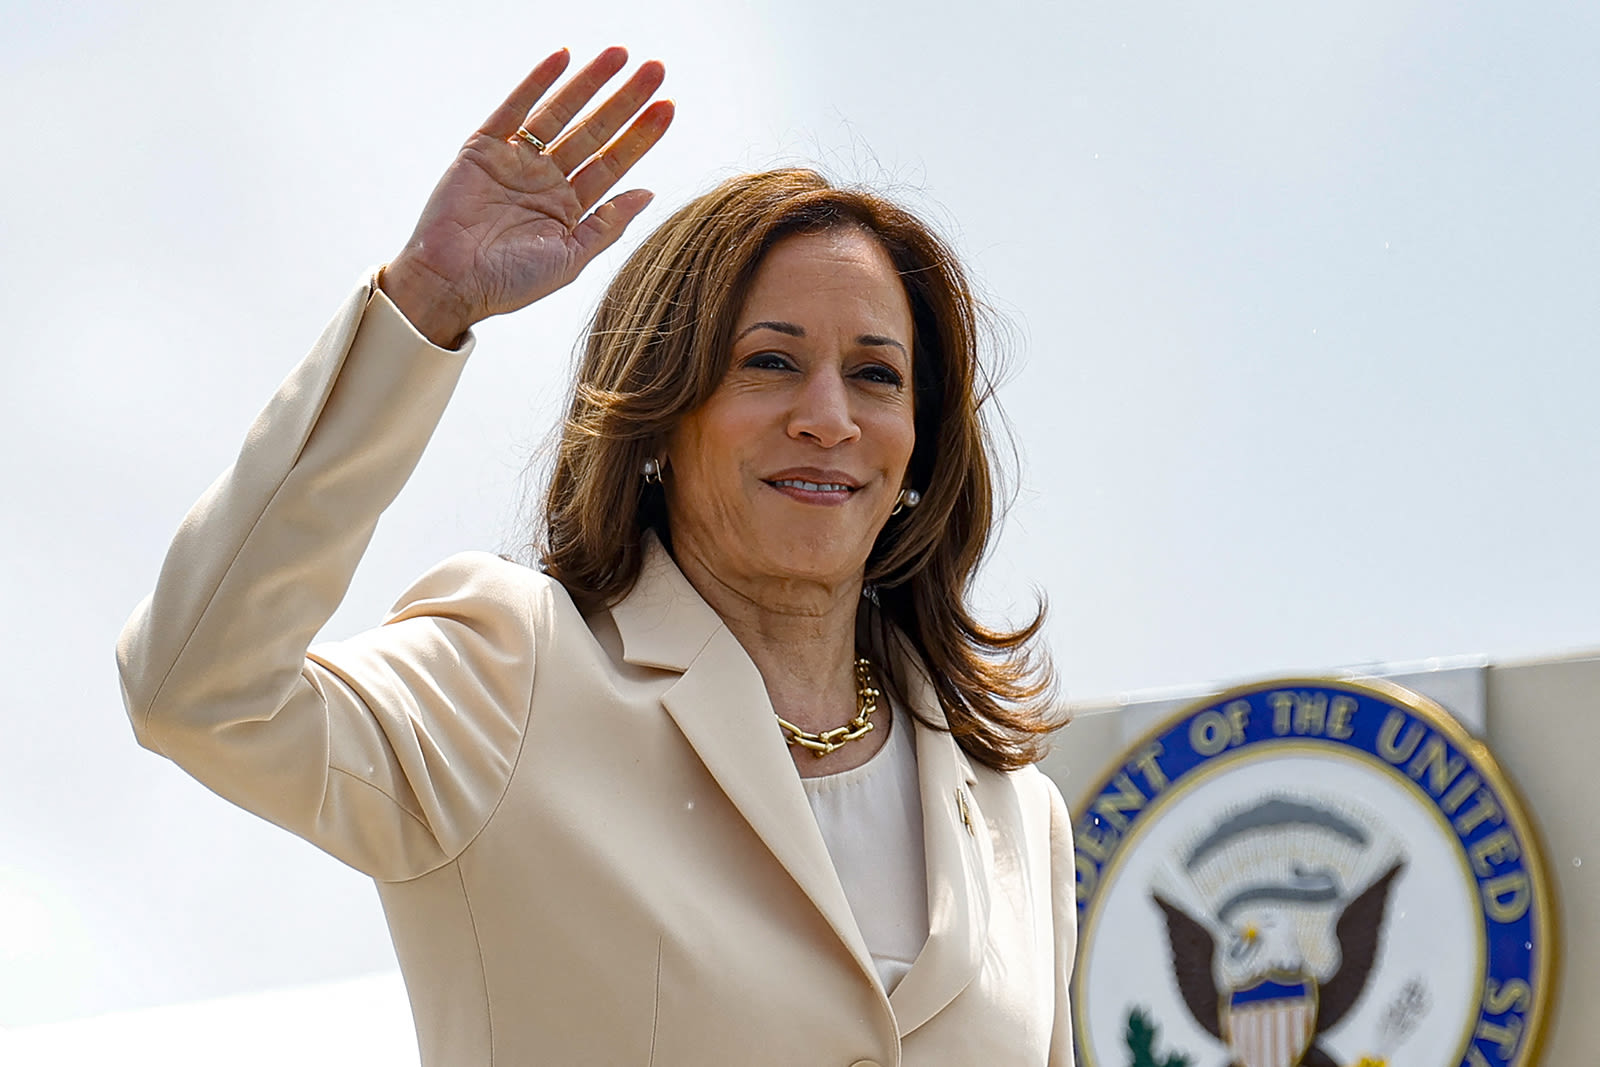 7 things to watch as Kamala Harris upends race against Trump with 100 days to go